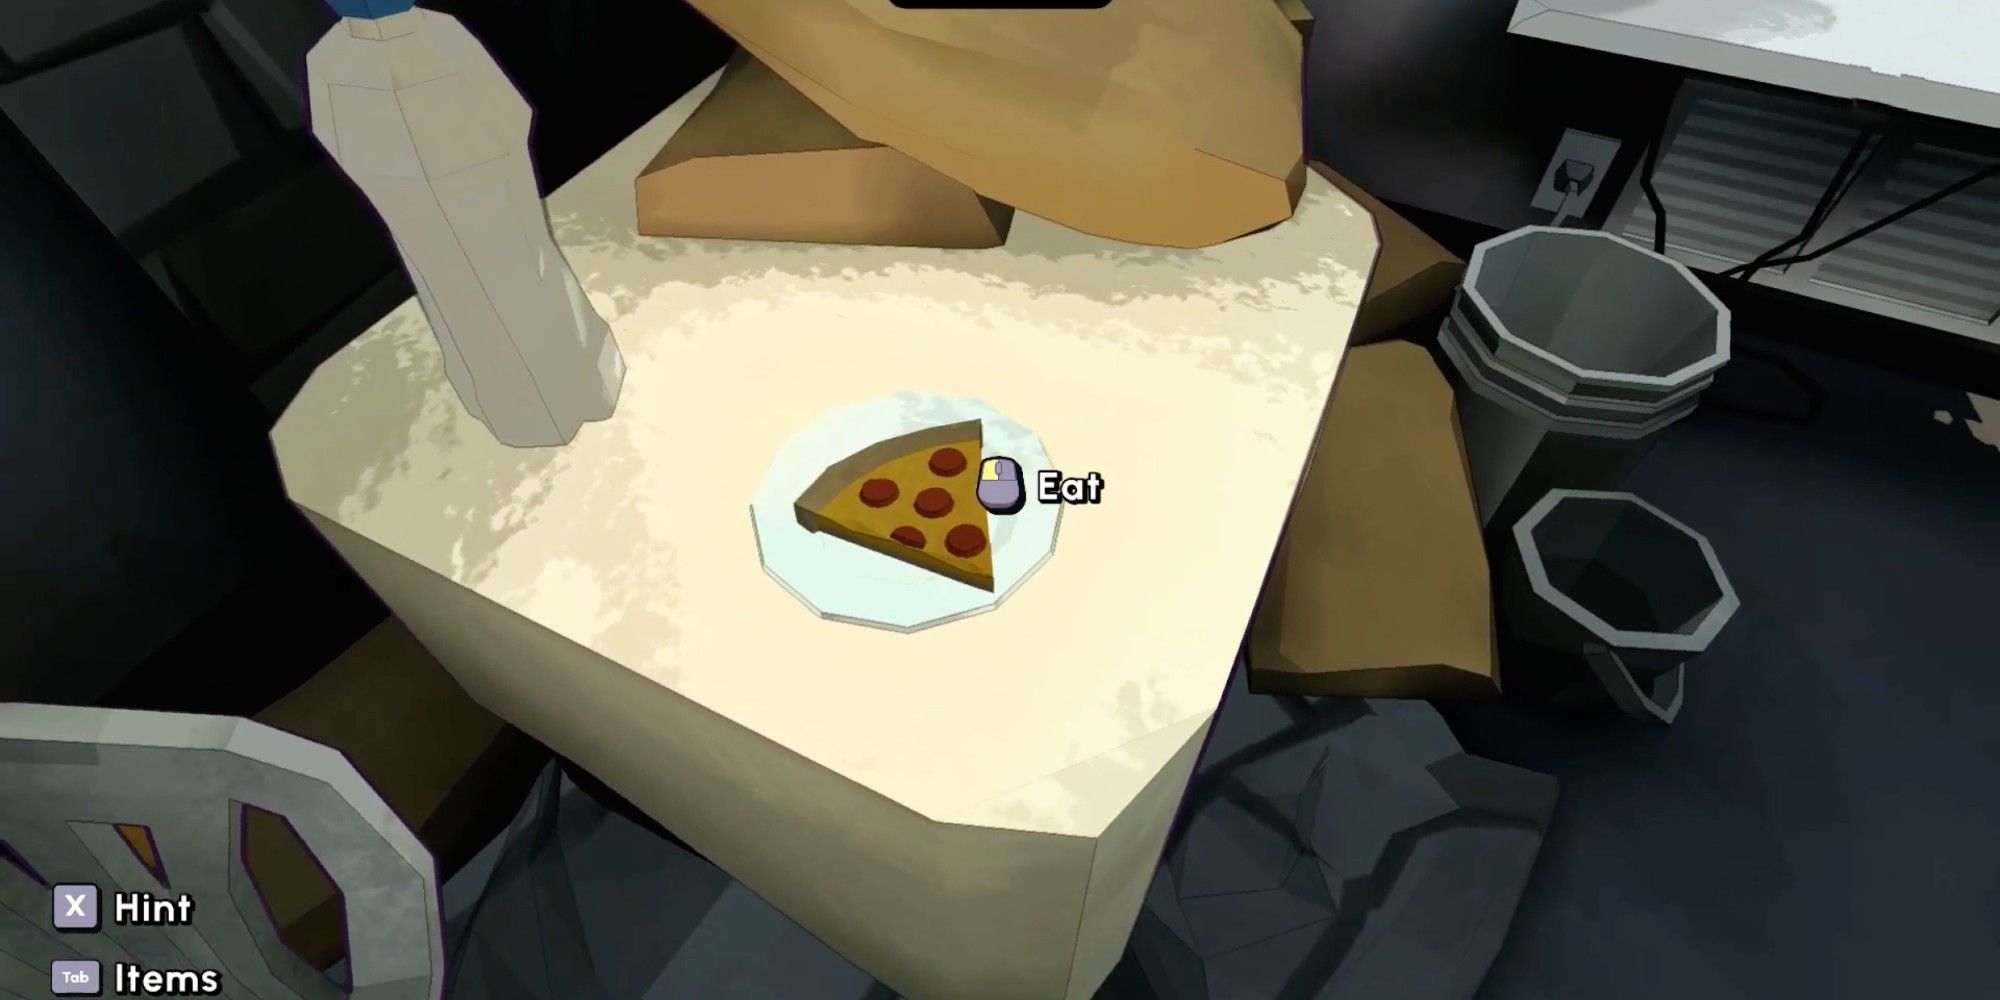 Eat The Pizza sitting on a table and plate in and abandoned room